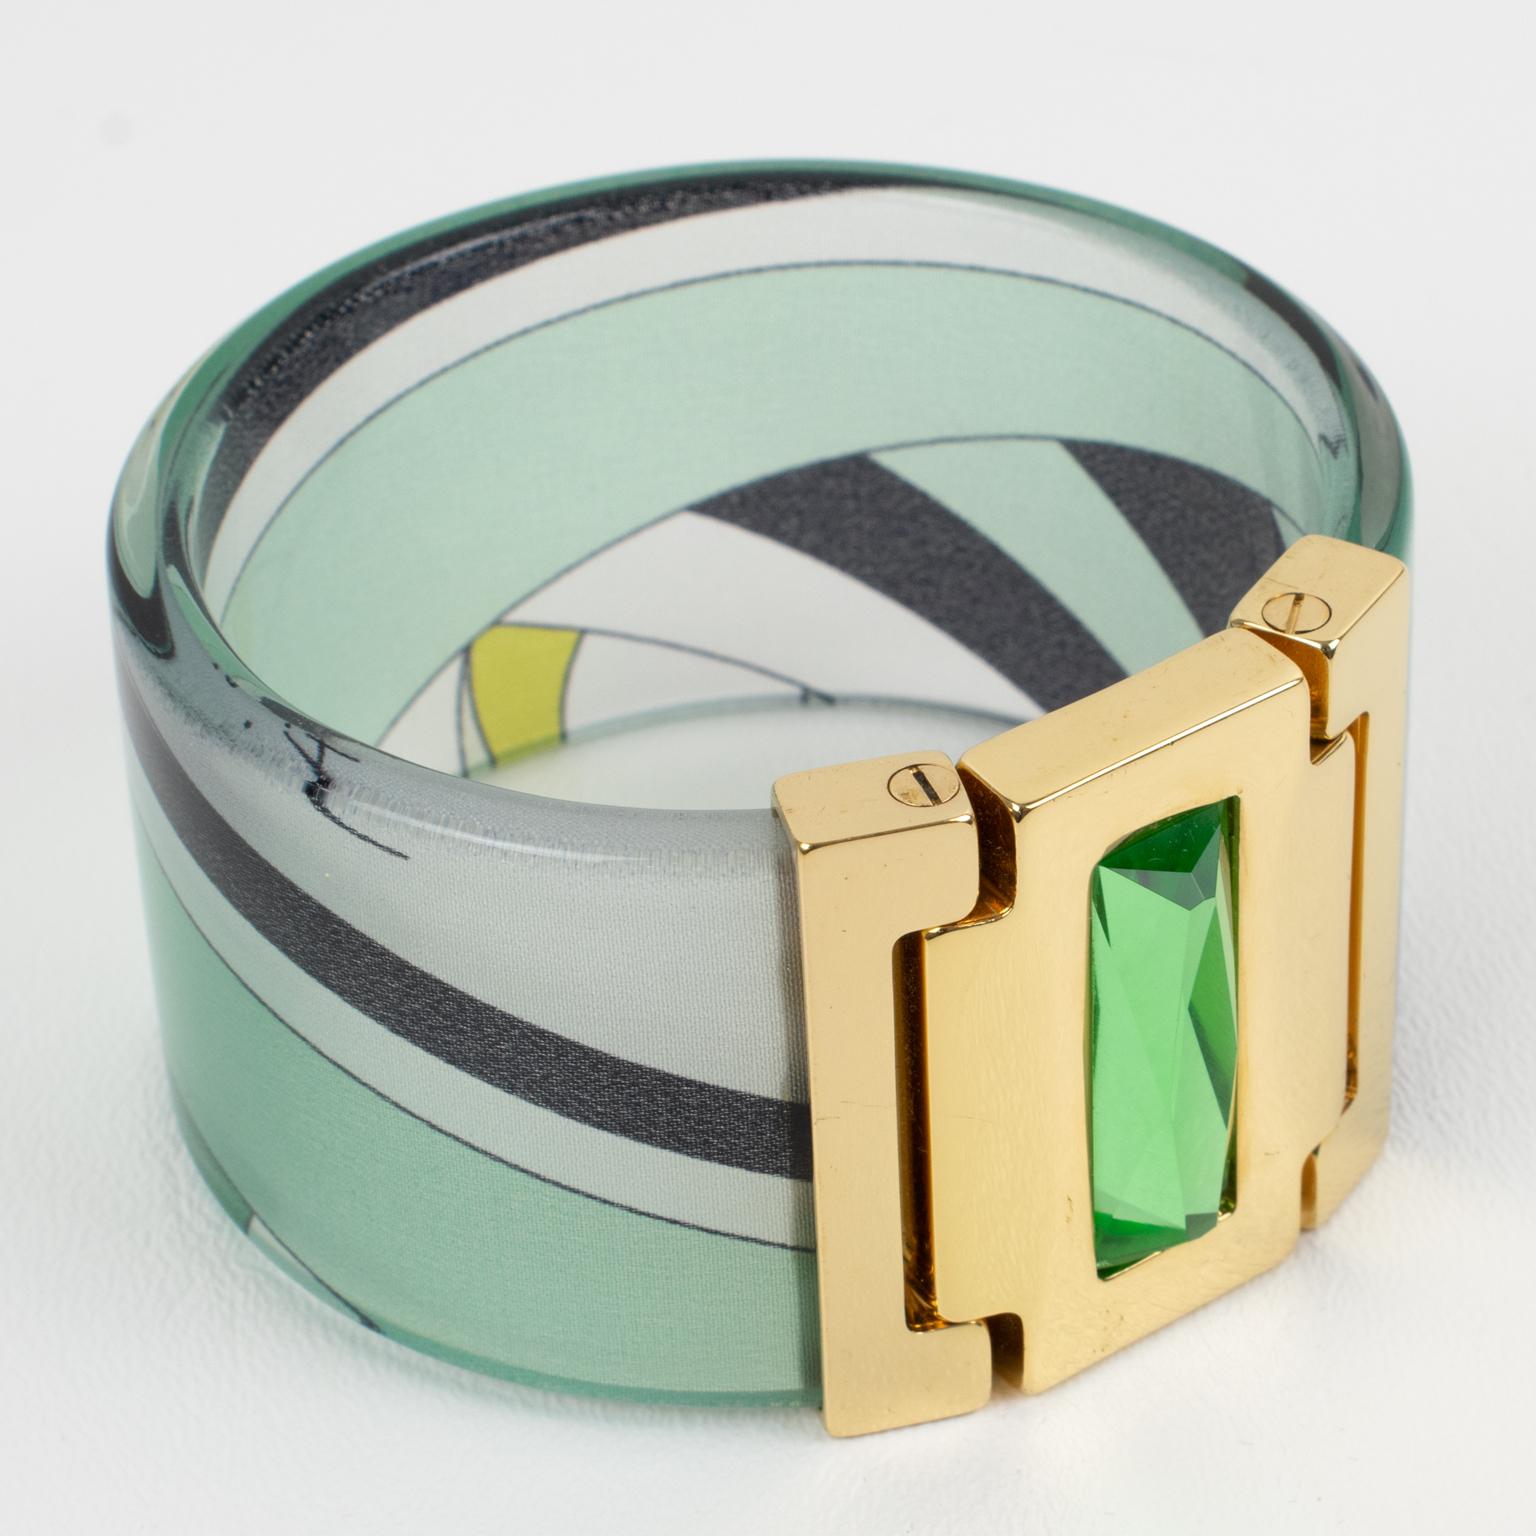 Modernist Emilio Pucci Jeweled Bracelet Bangle Lucite with Green and Black Silk Inclusion For Sale